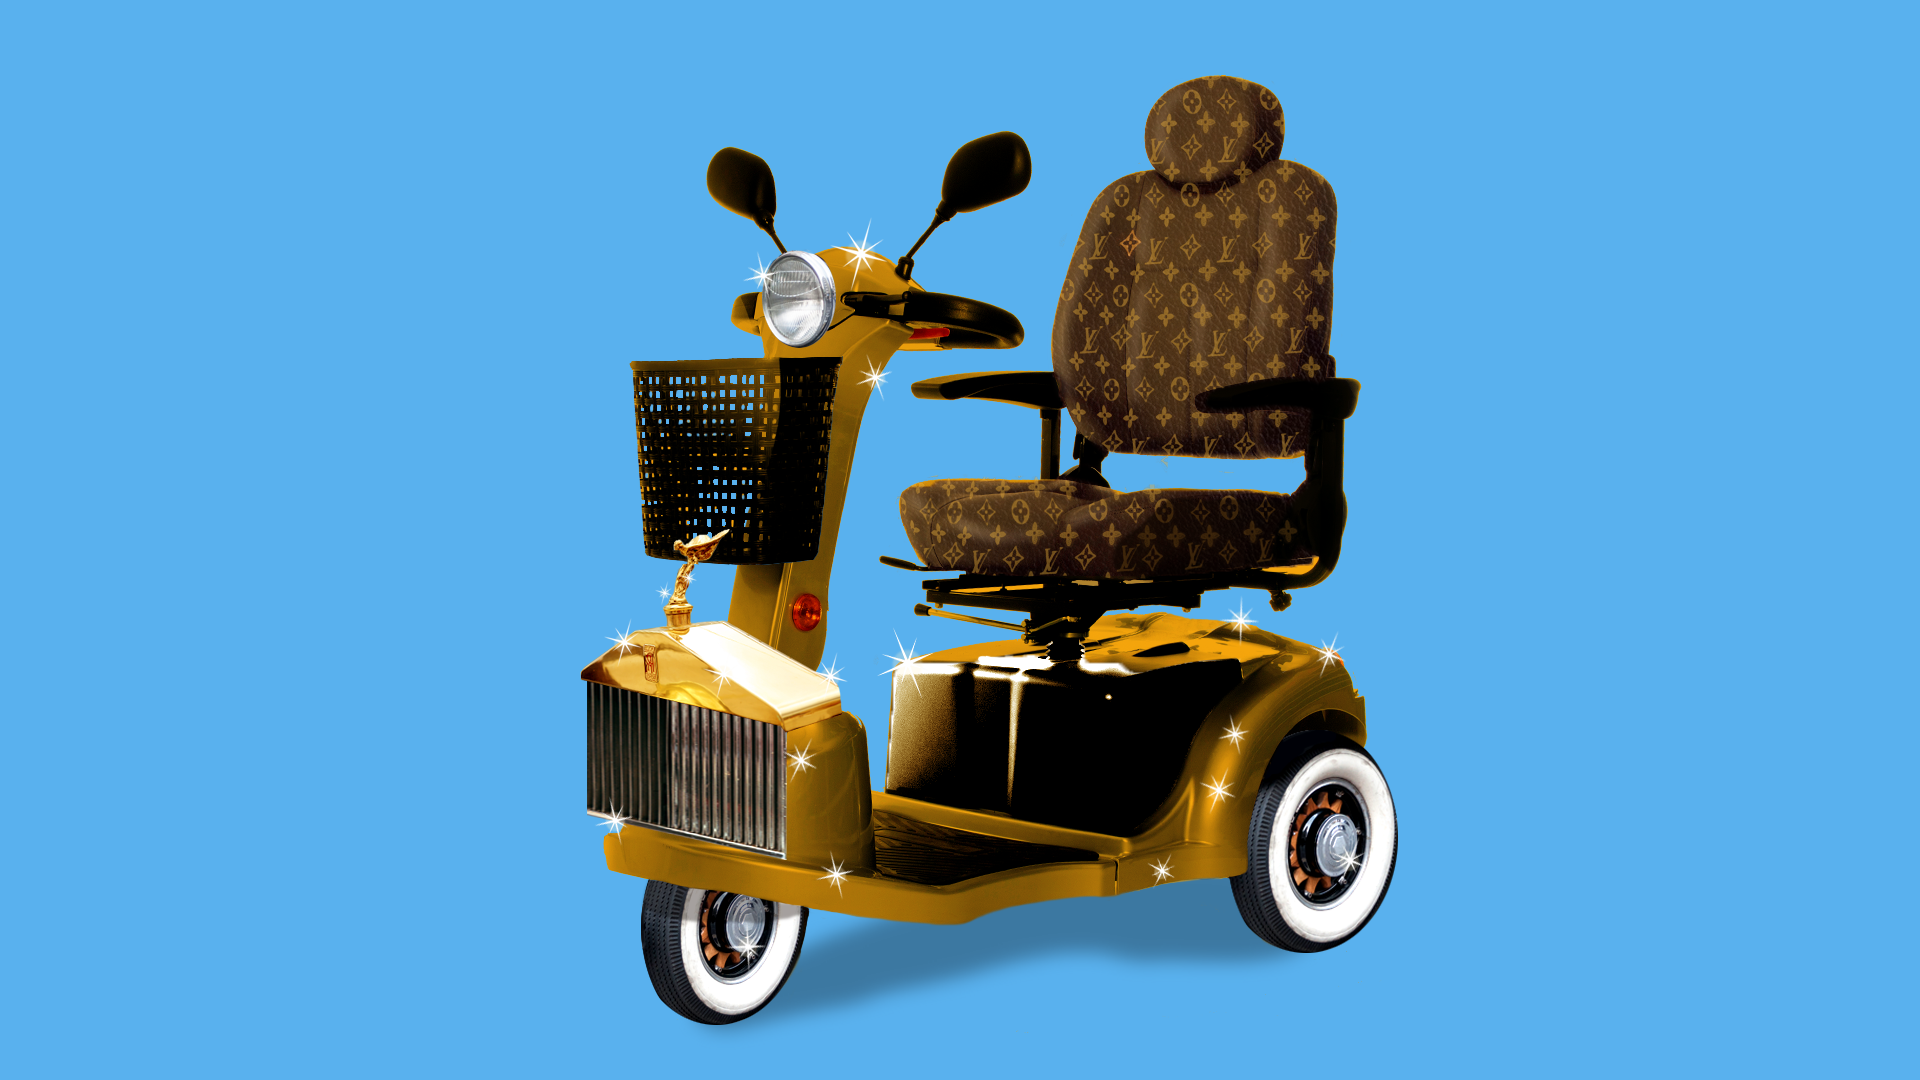 An illustration depicting a gold wheelchair